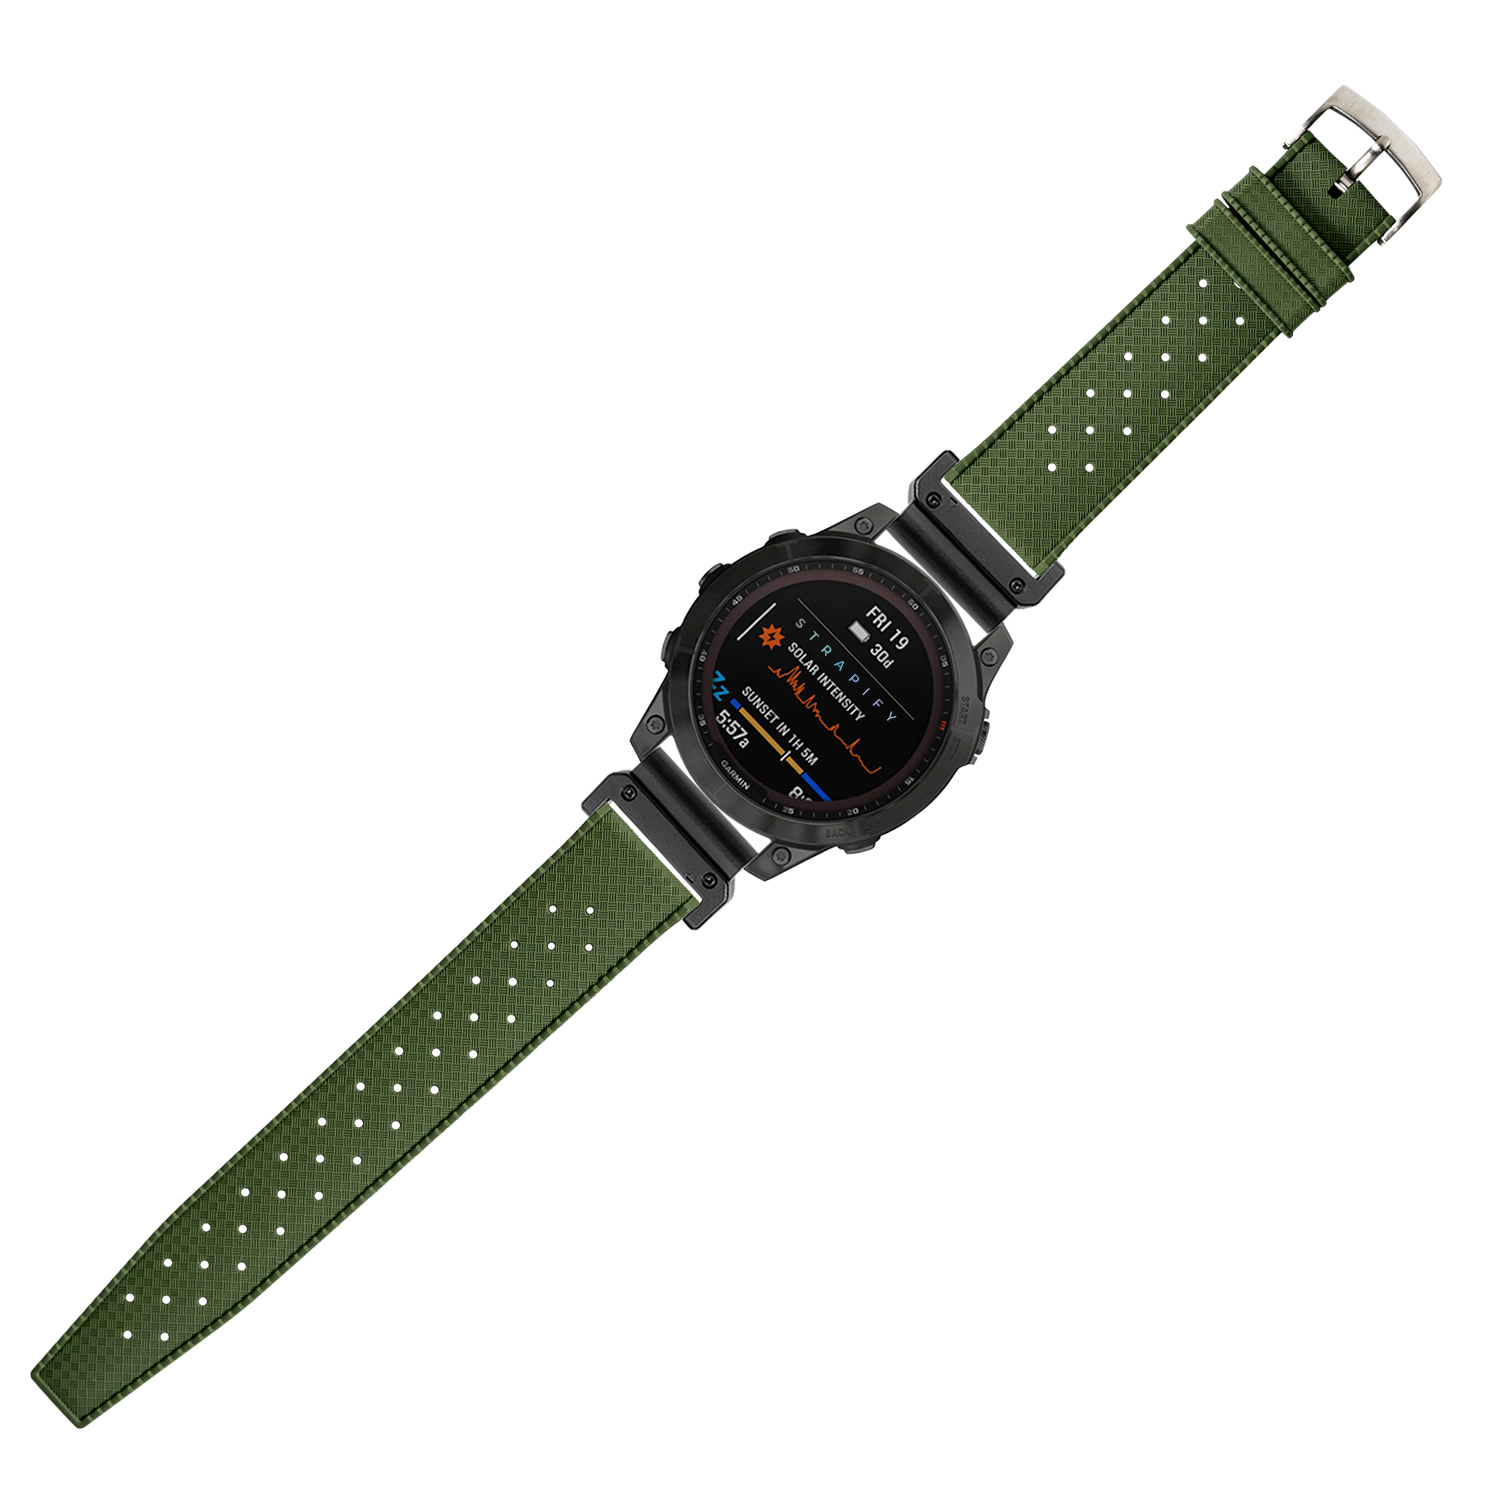 [QuickFit] King Tropic FKM Rubber - Forest Green 26mm